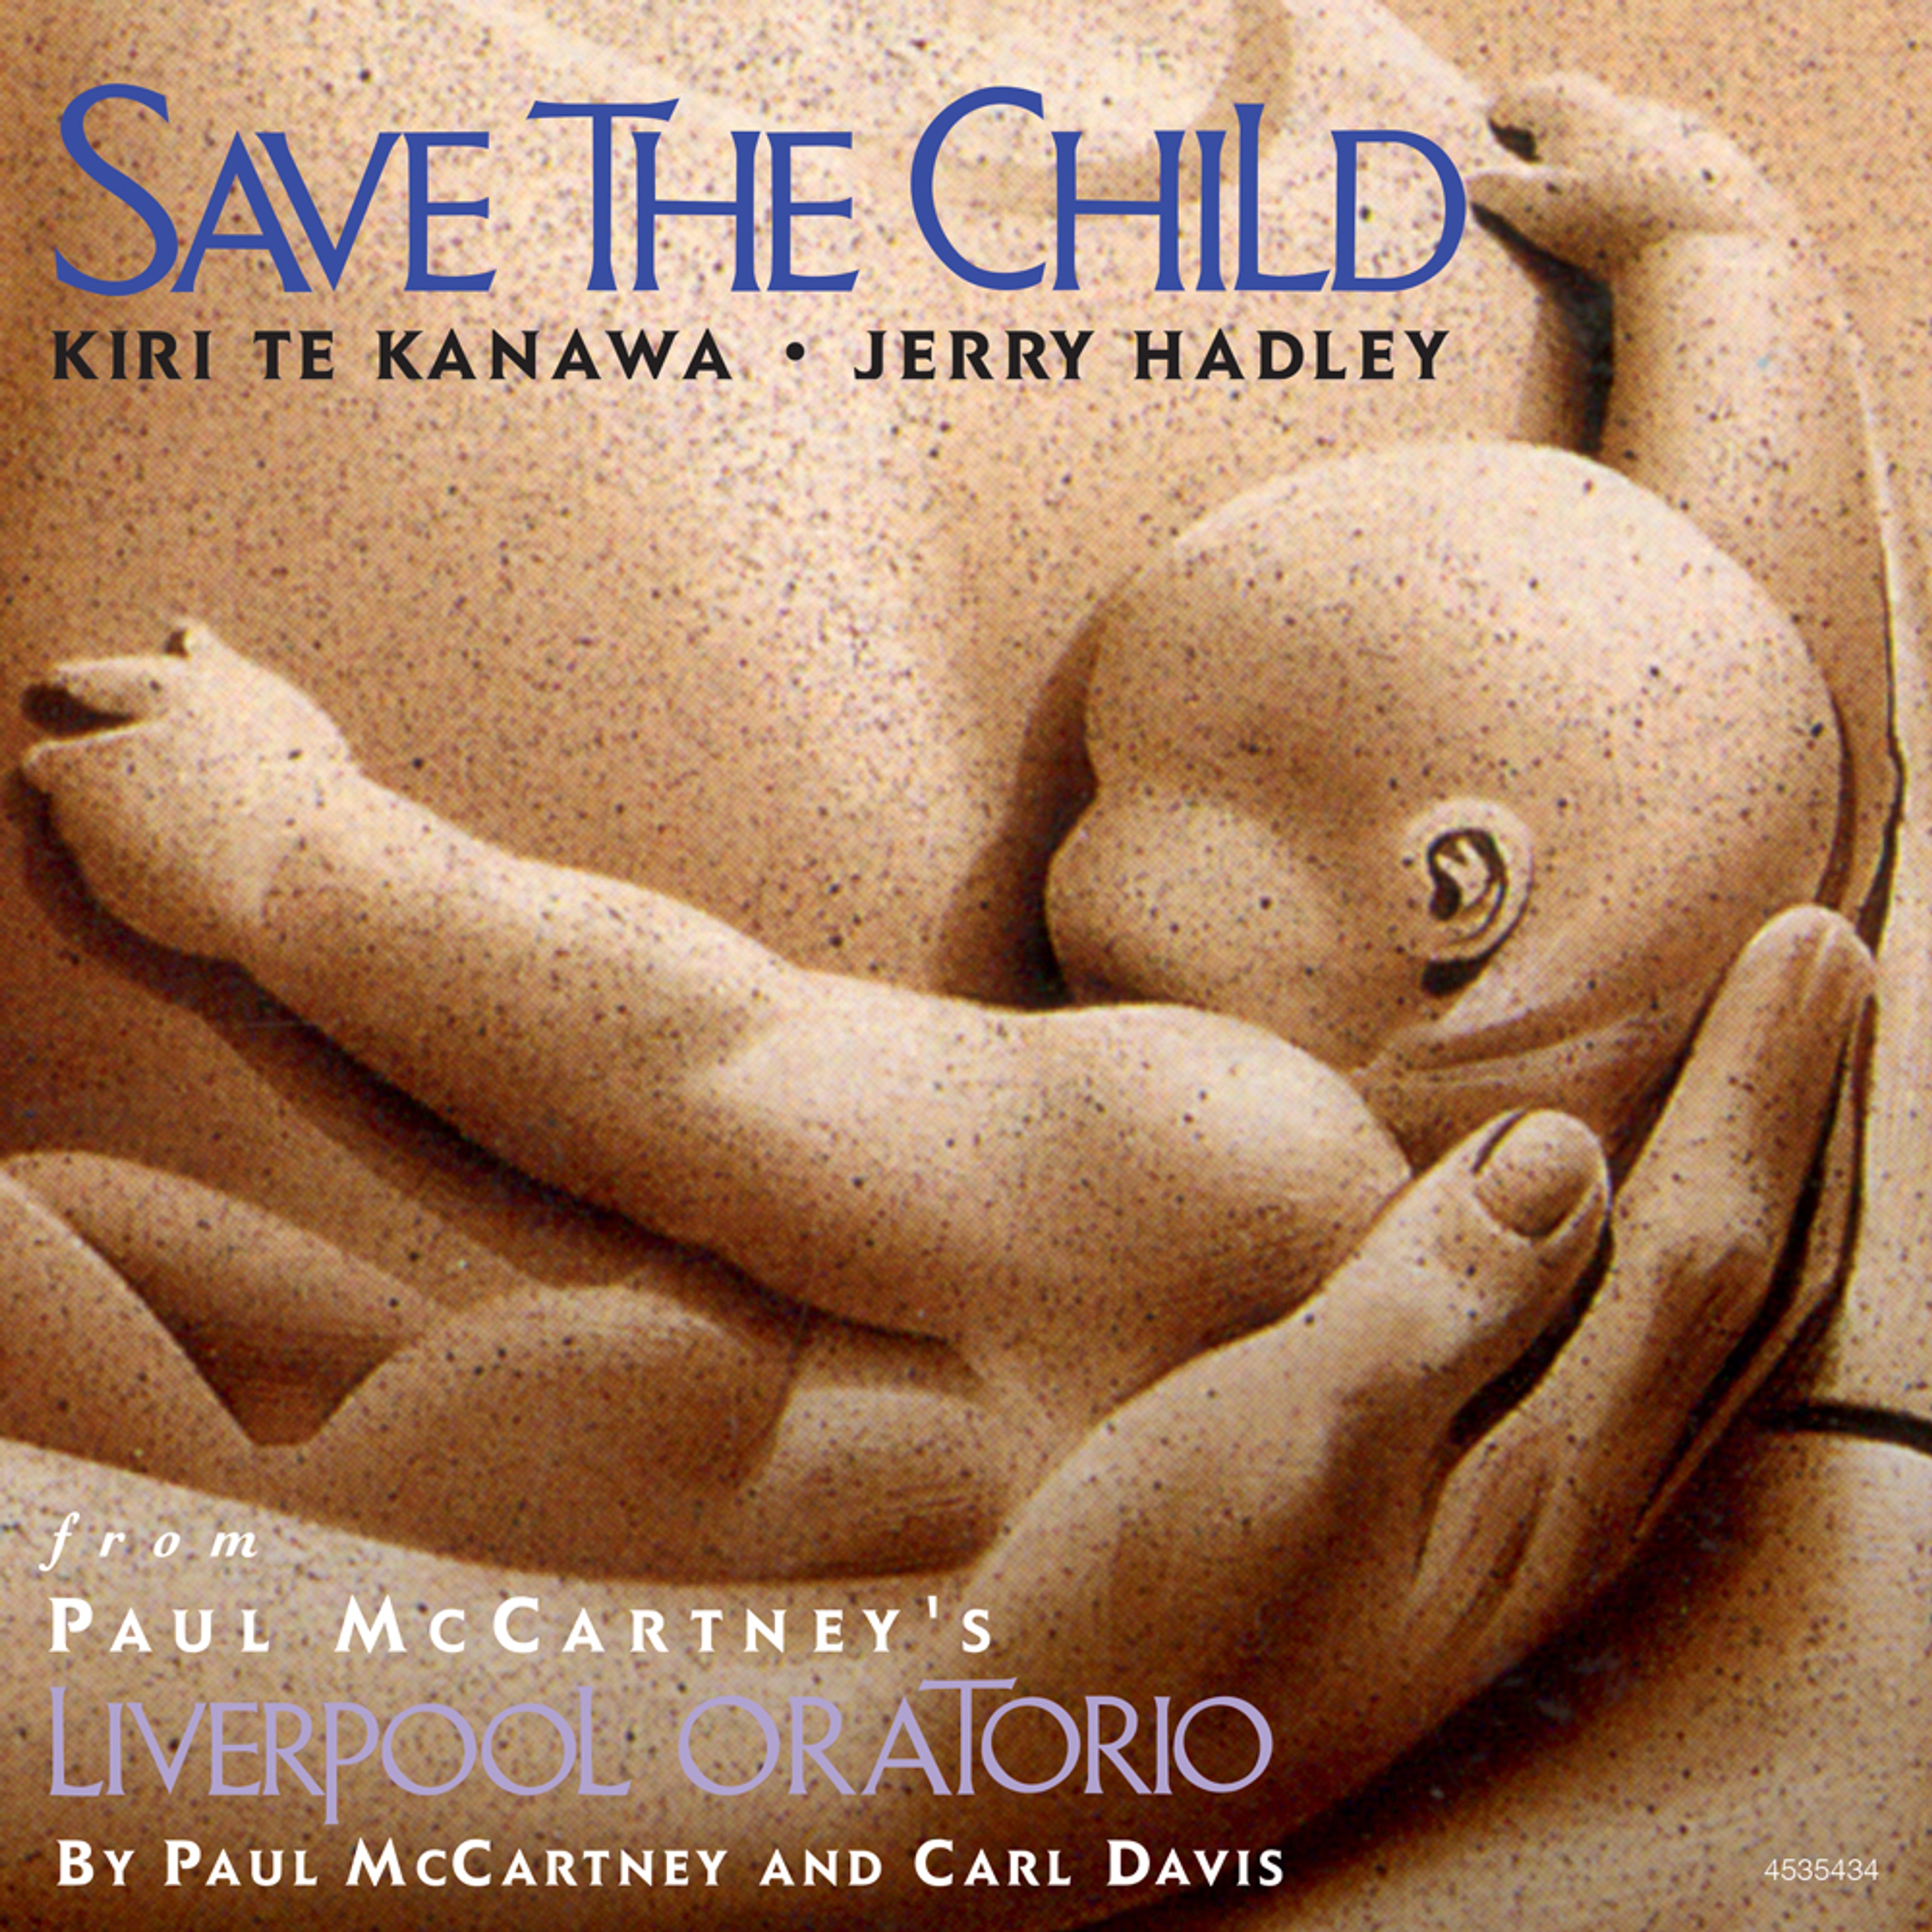 “Save The Child” Single artwork as featured in 'The 7" Singles Box'